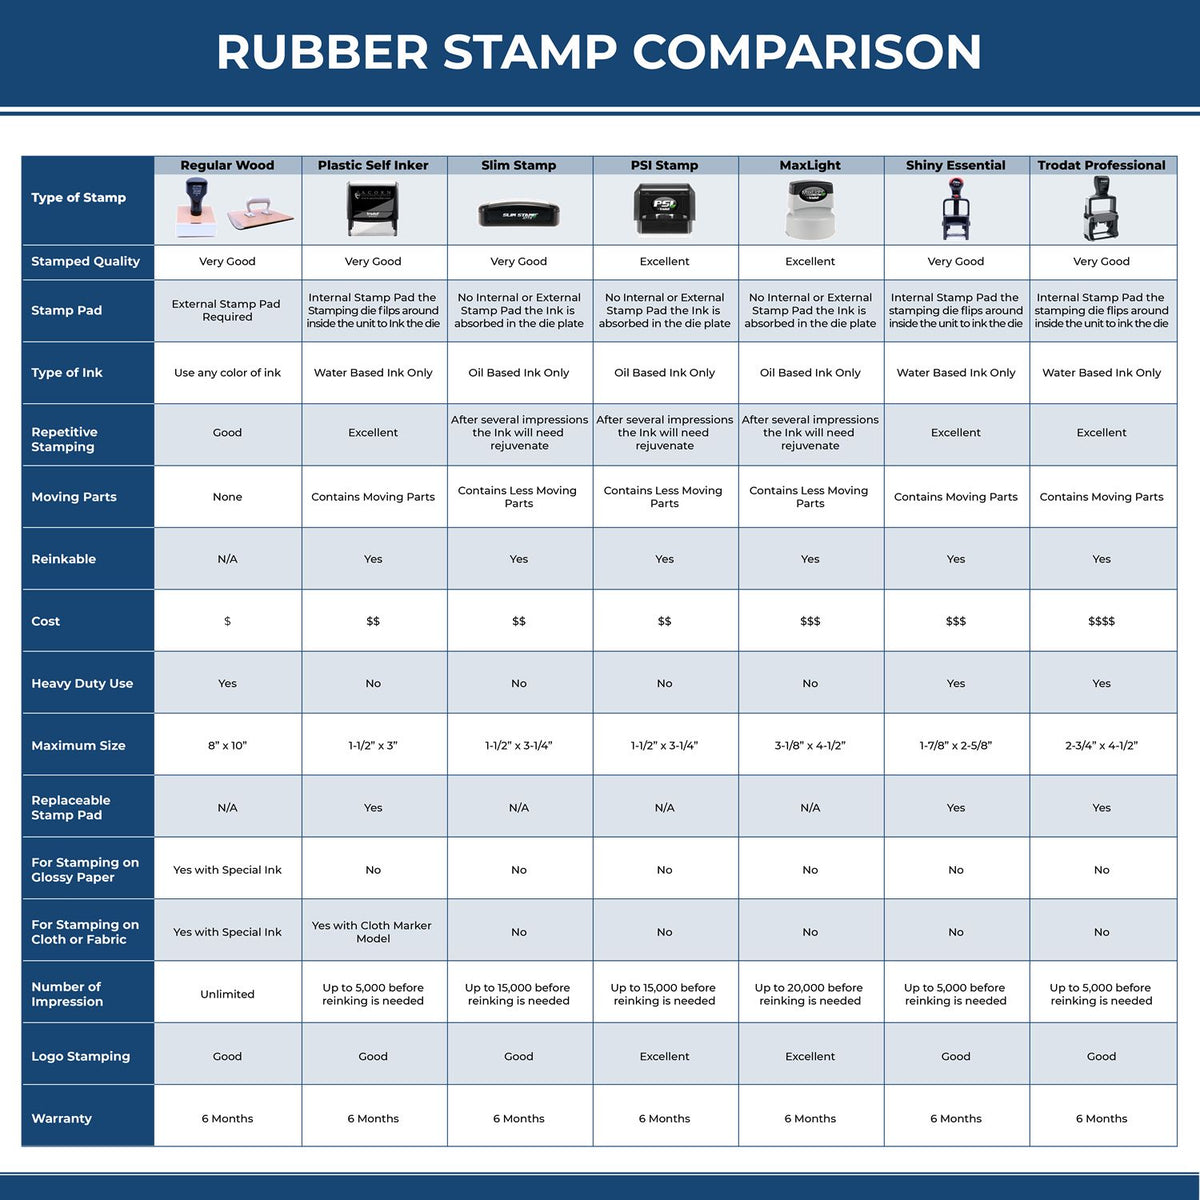 A comparison chart for the different types of mount models available for the PSI Ohio Notary Stamp.